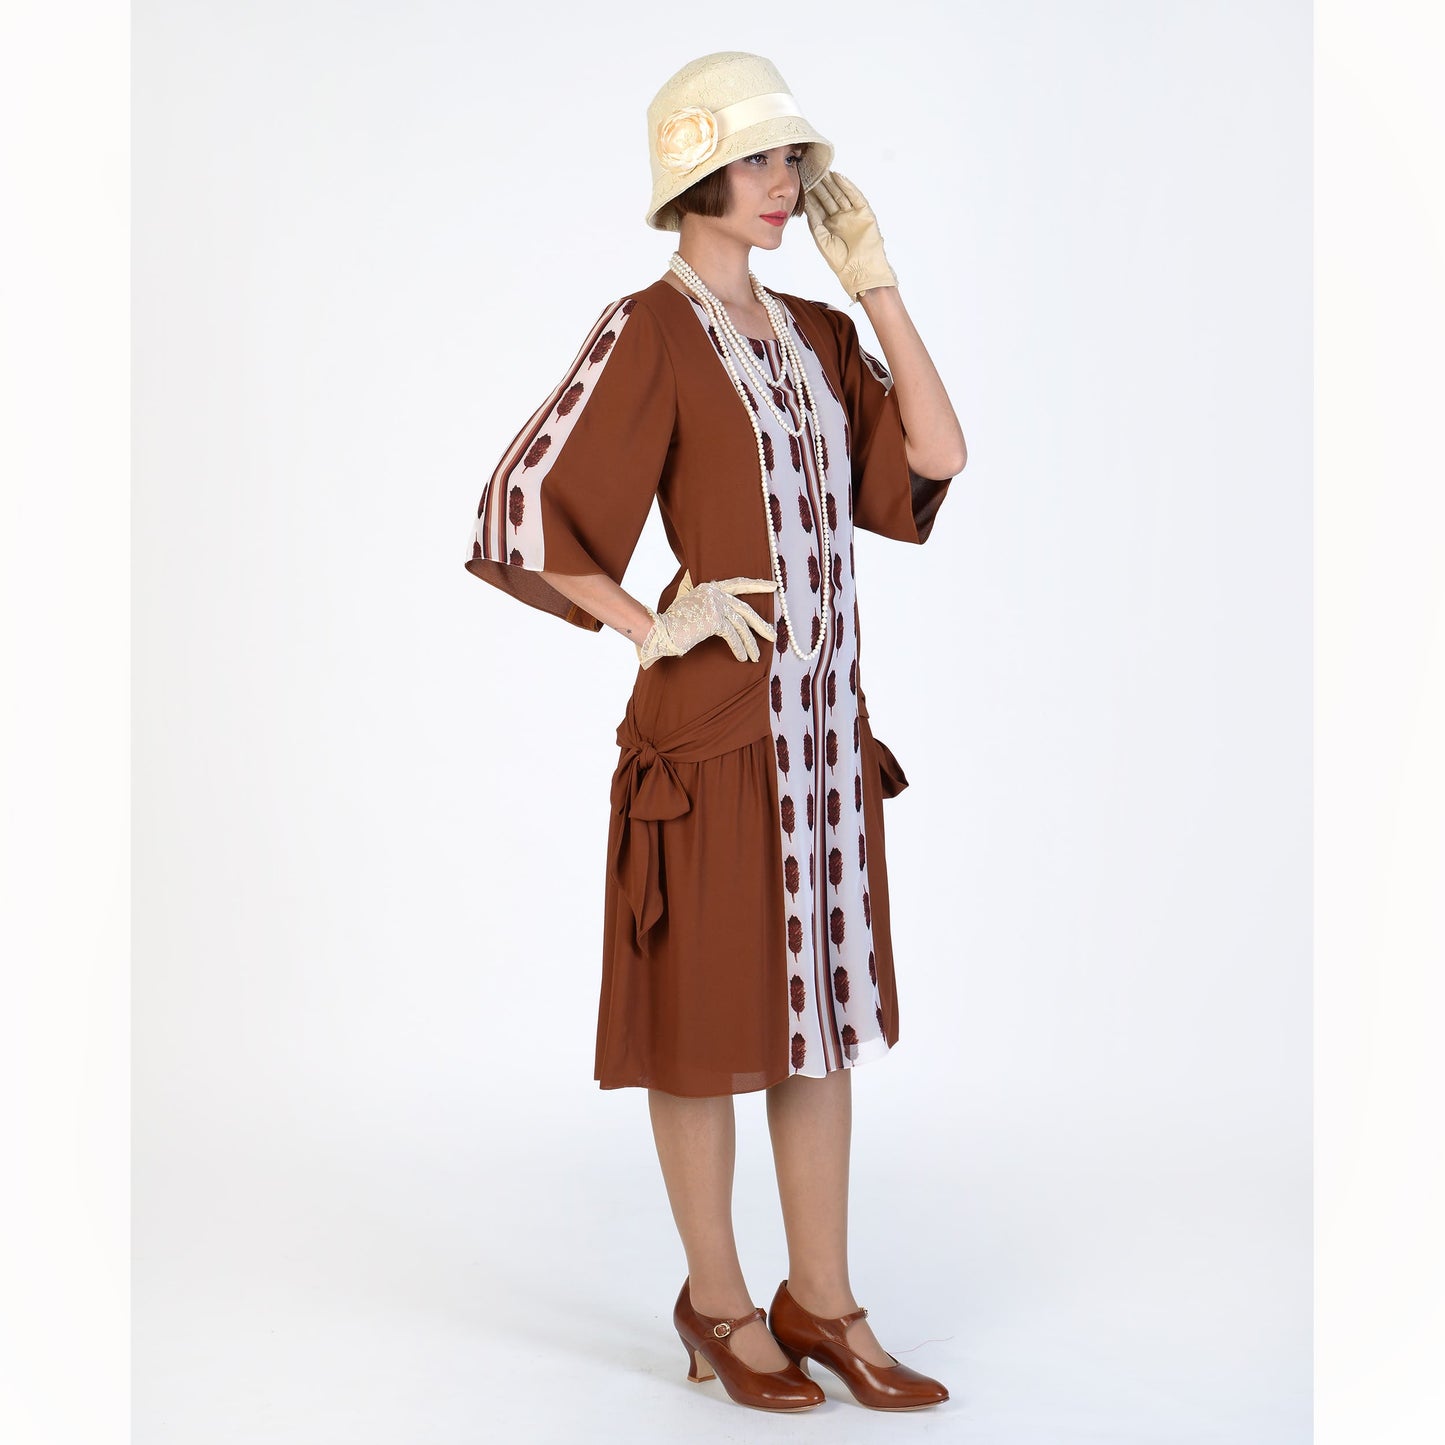 1920s Gatsby dress made of brown crepe georgette and printed chiffon